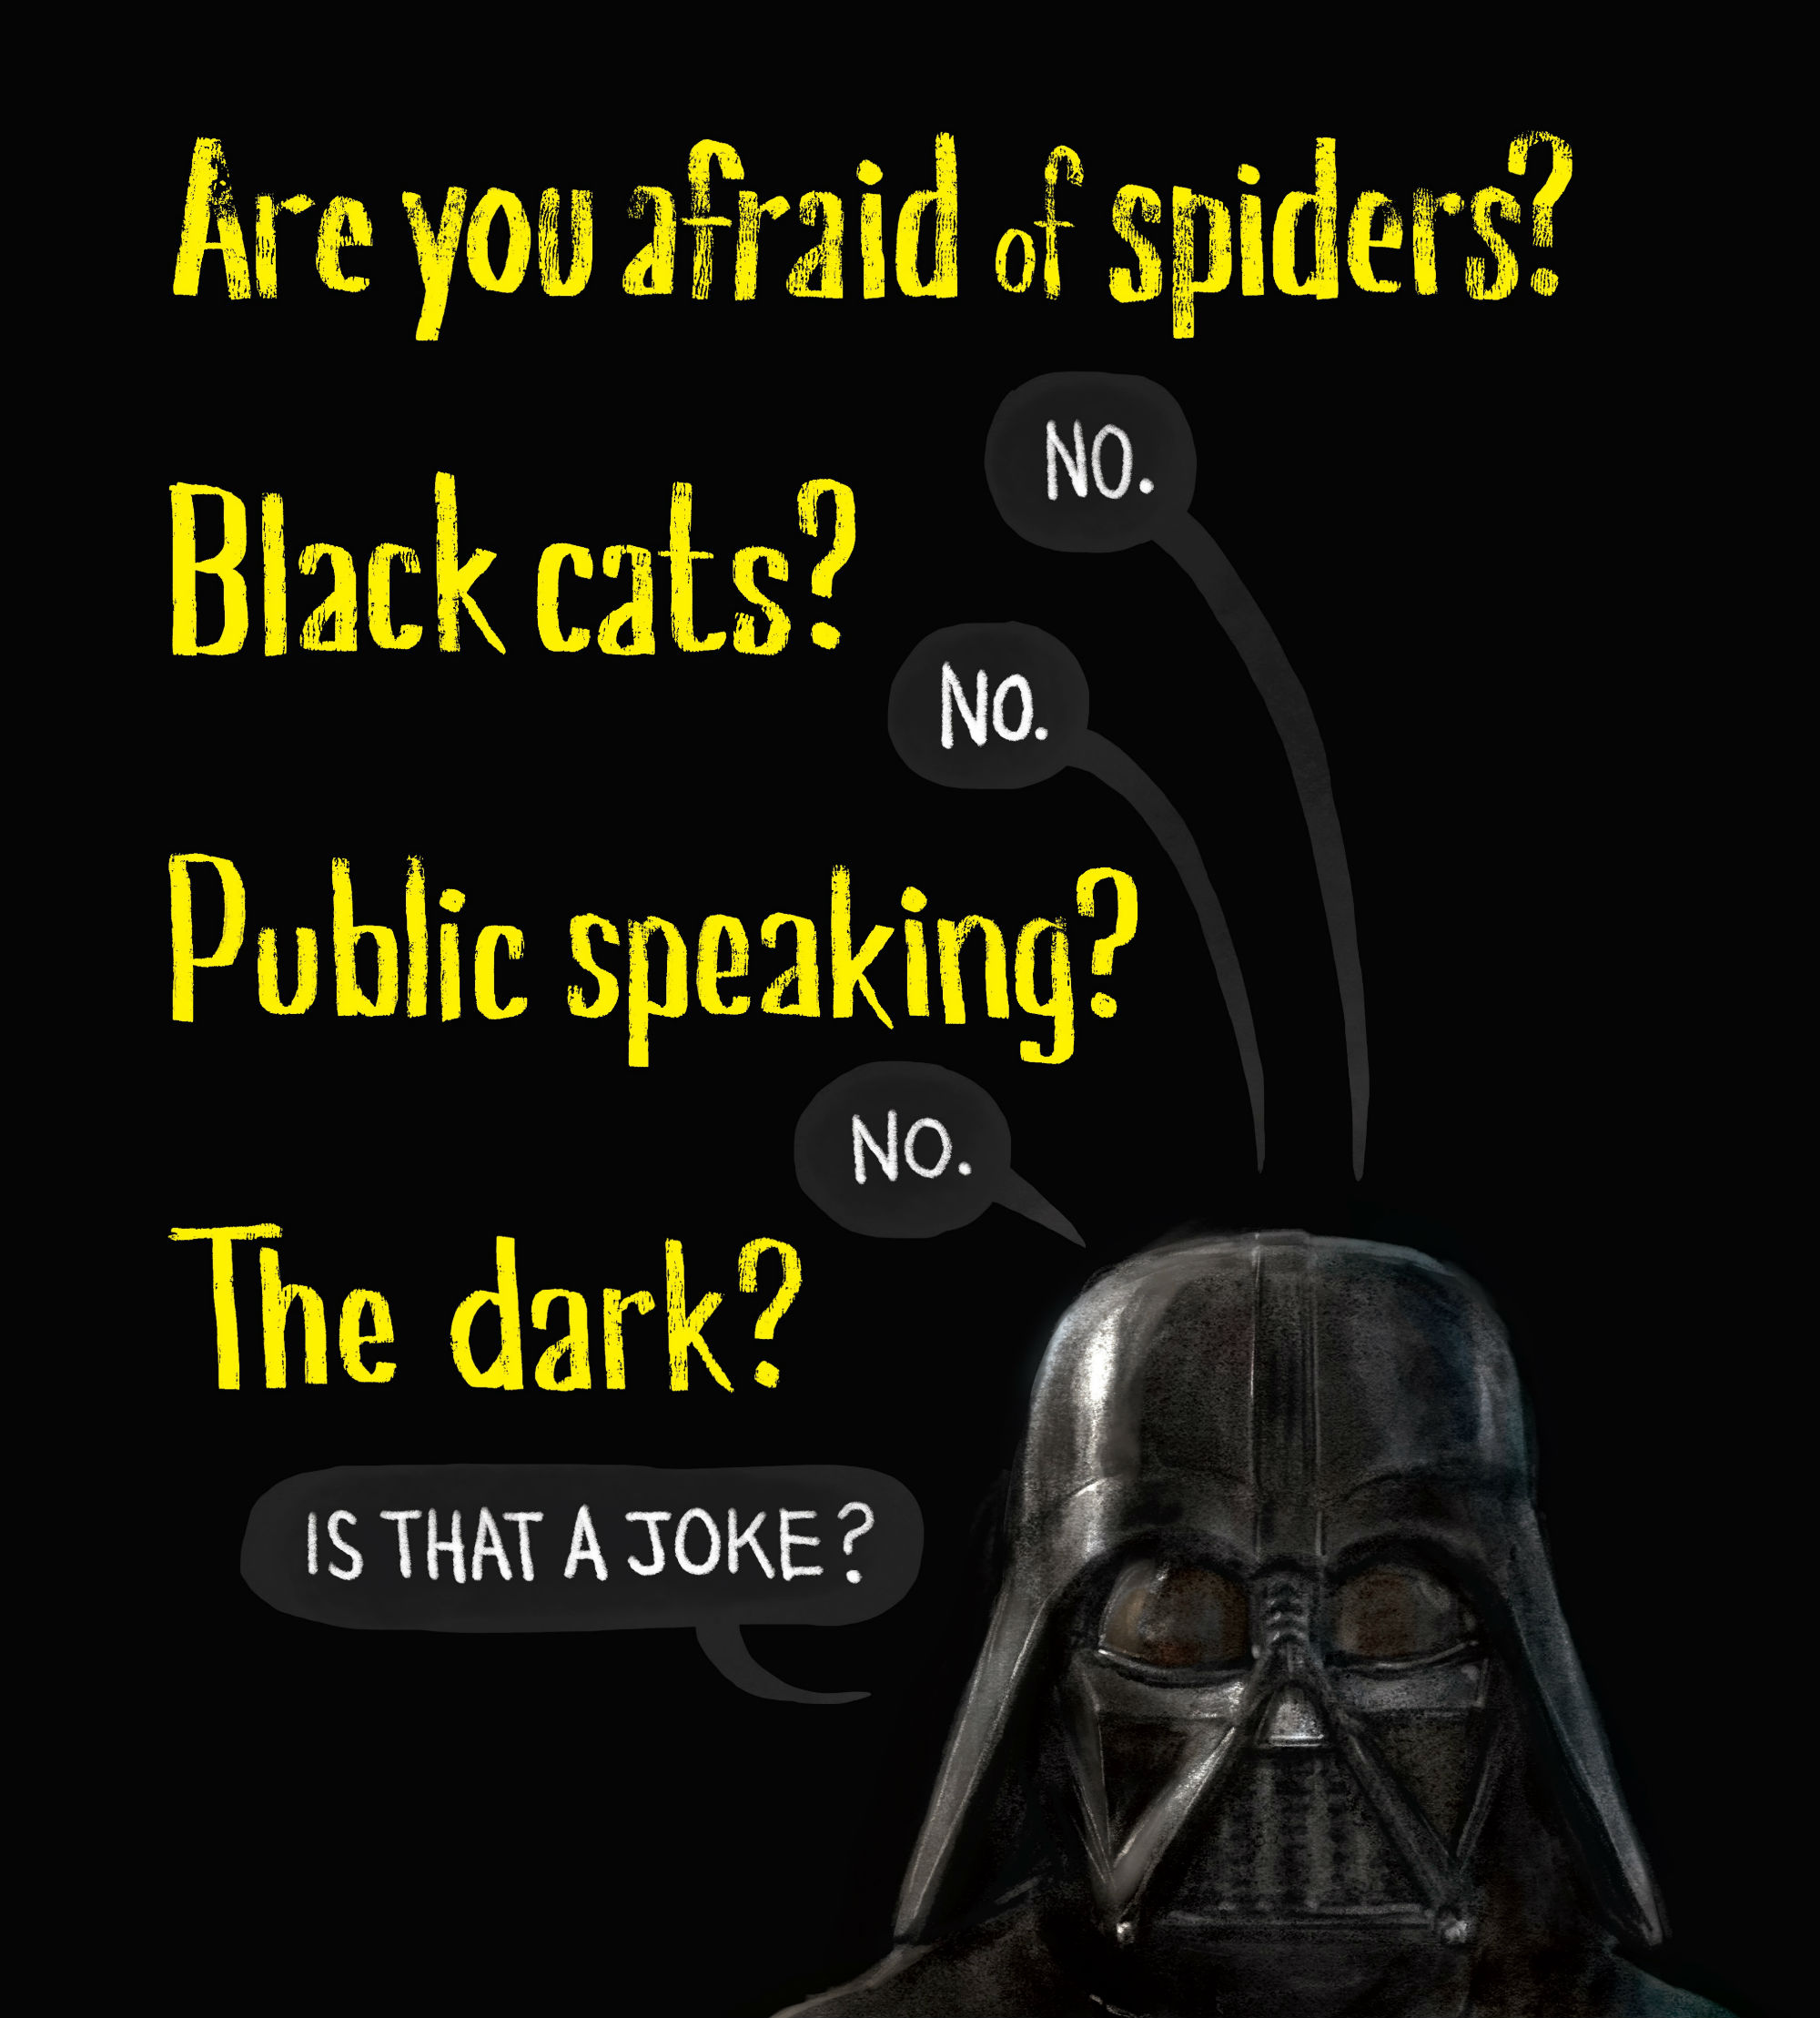 Lovely Children’s Book Tries To Figure Out What Scares Darth Vader (Answer: Not Much)